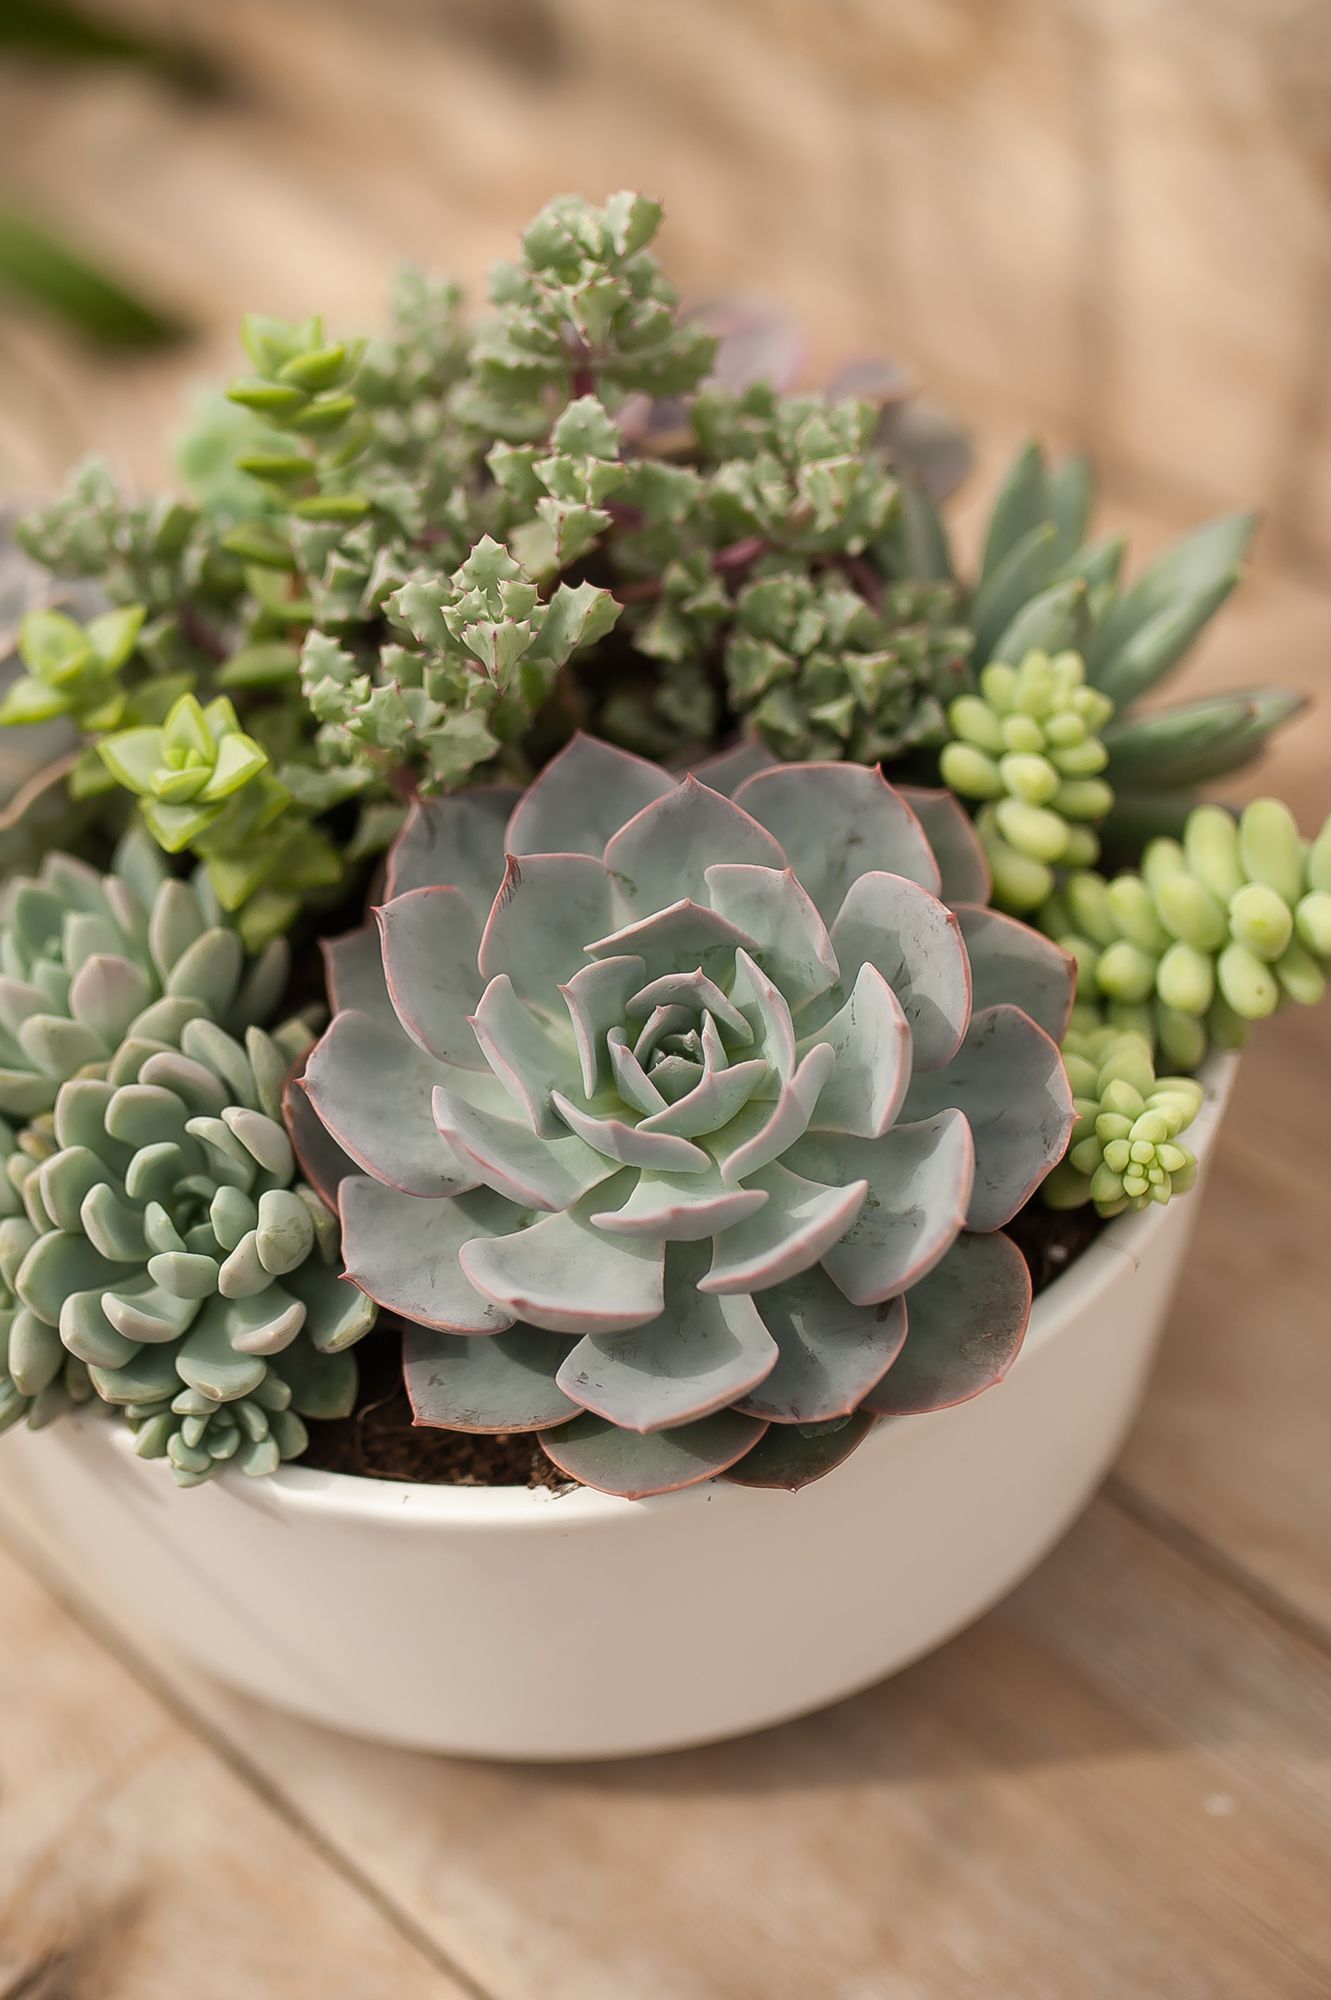 THE ART OF SUCCULENTS